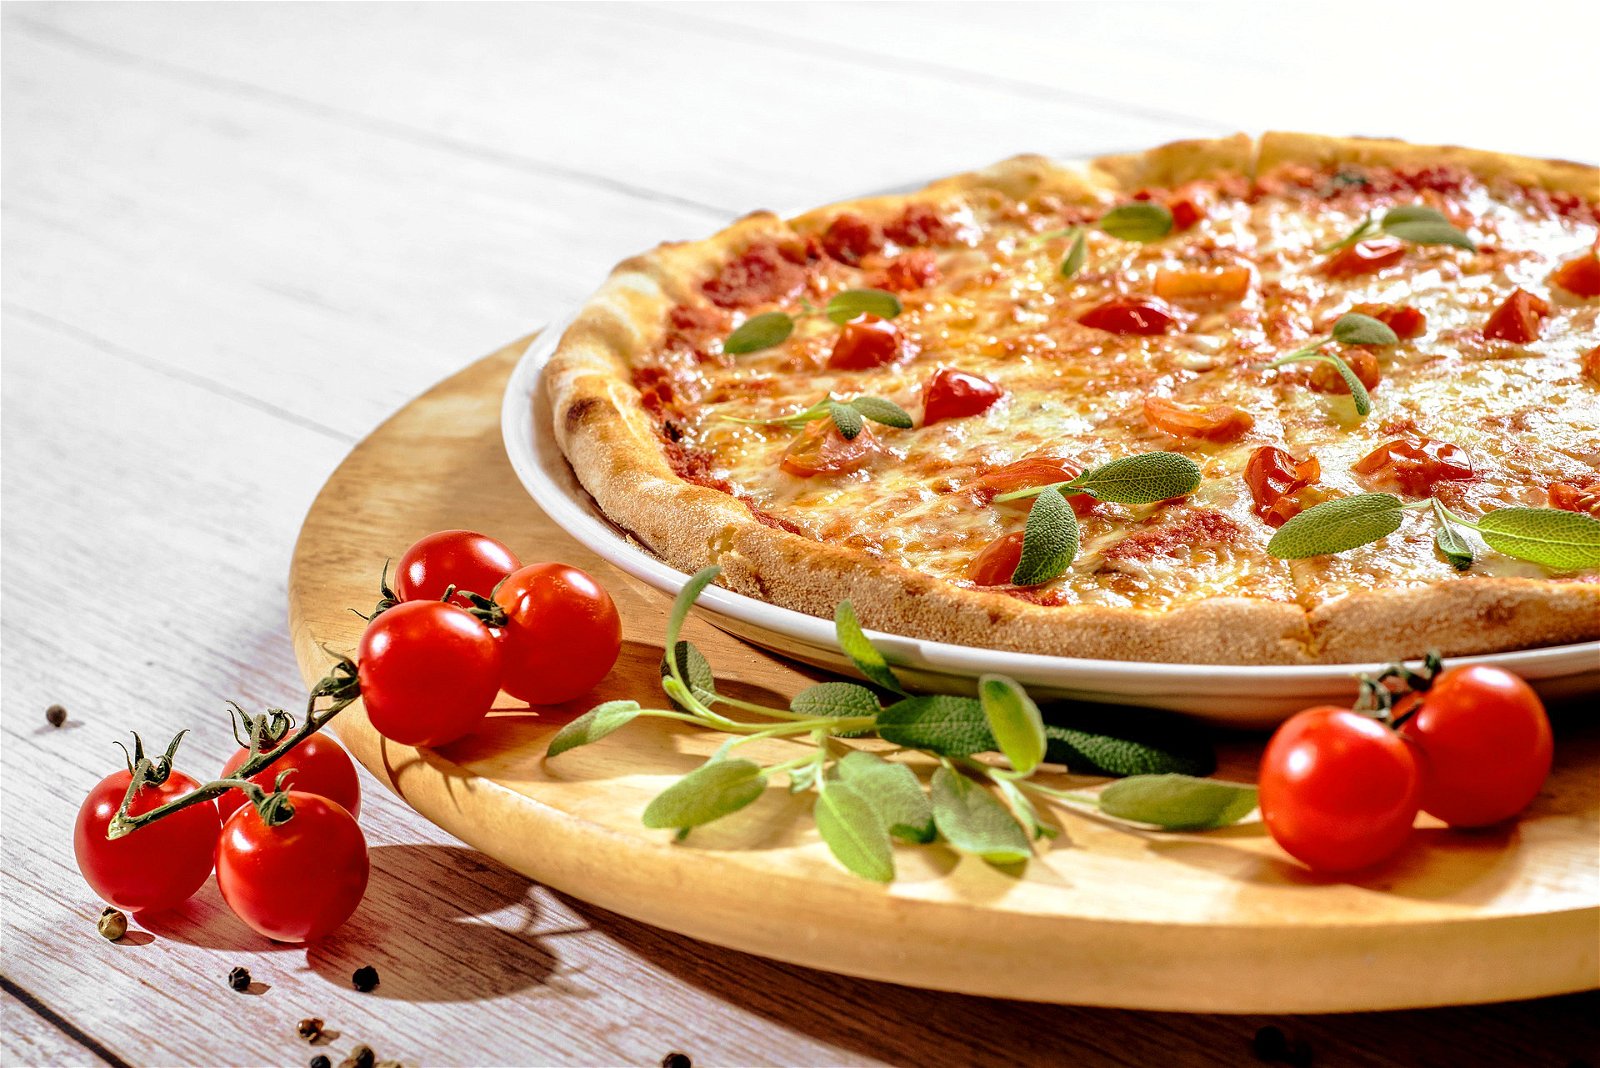 A food photography shot of a pizza - food photography tips